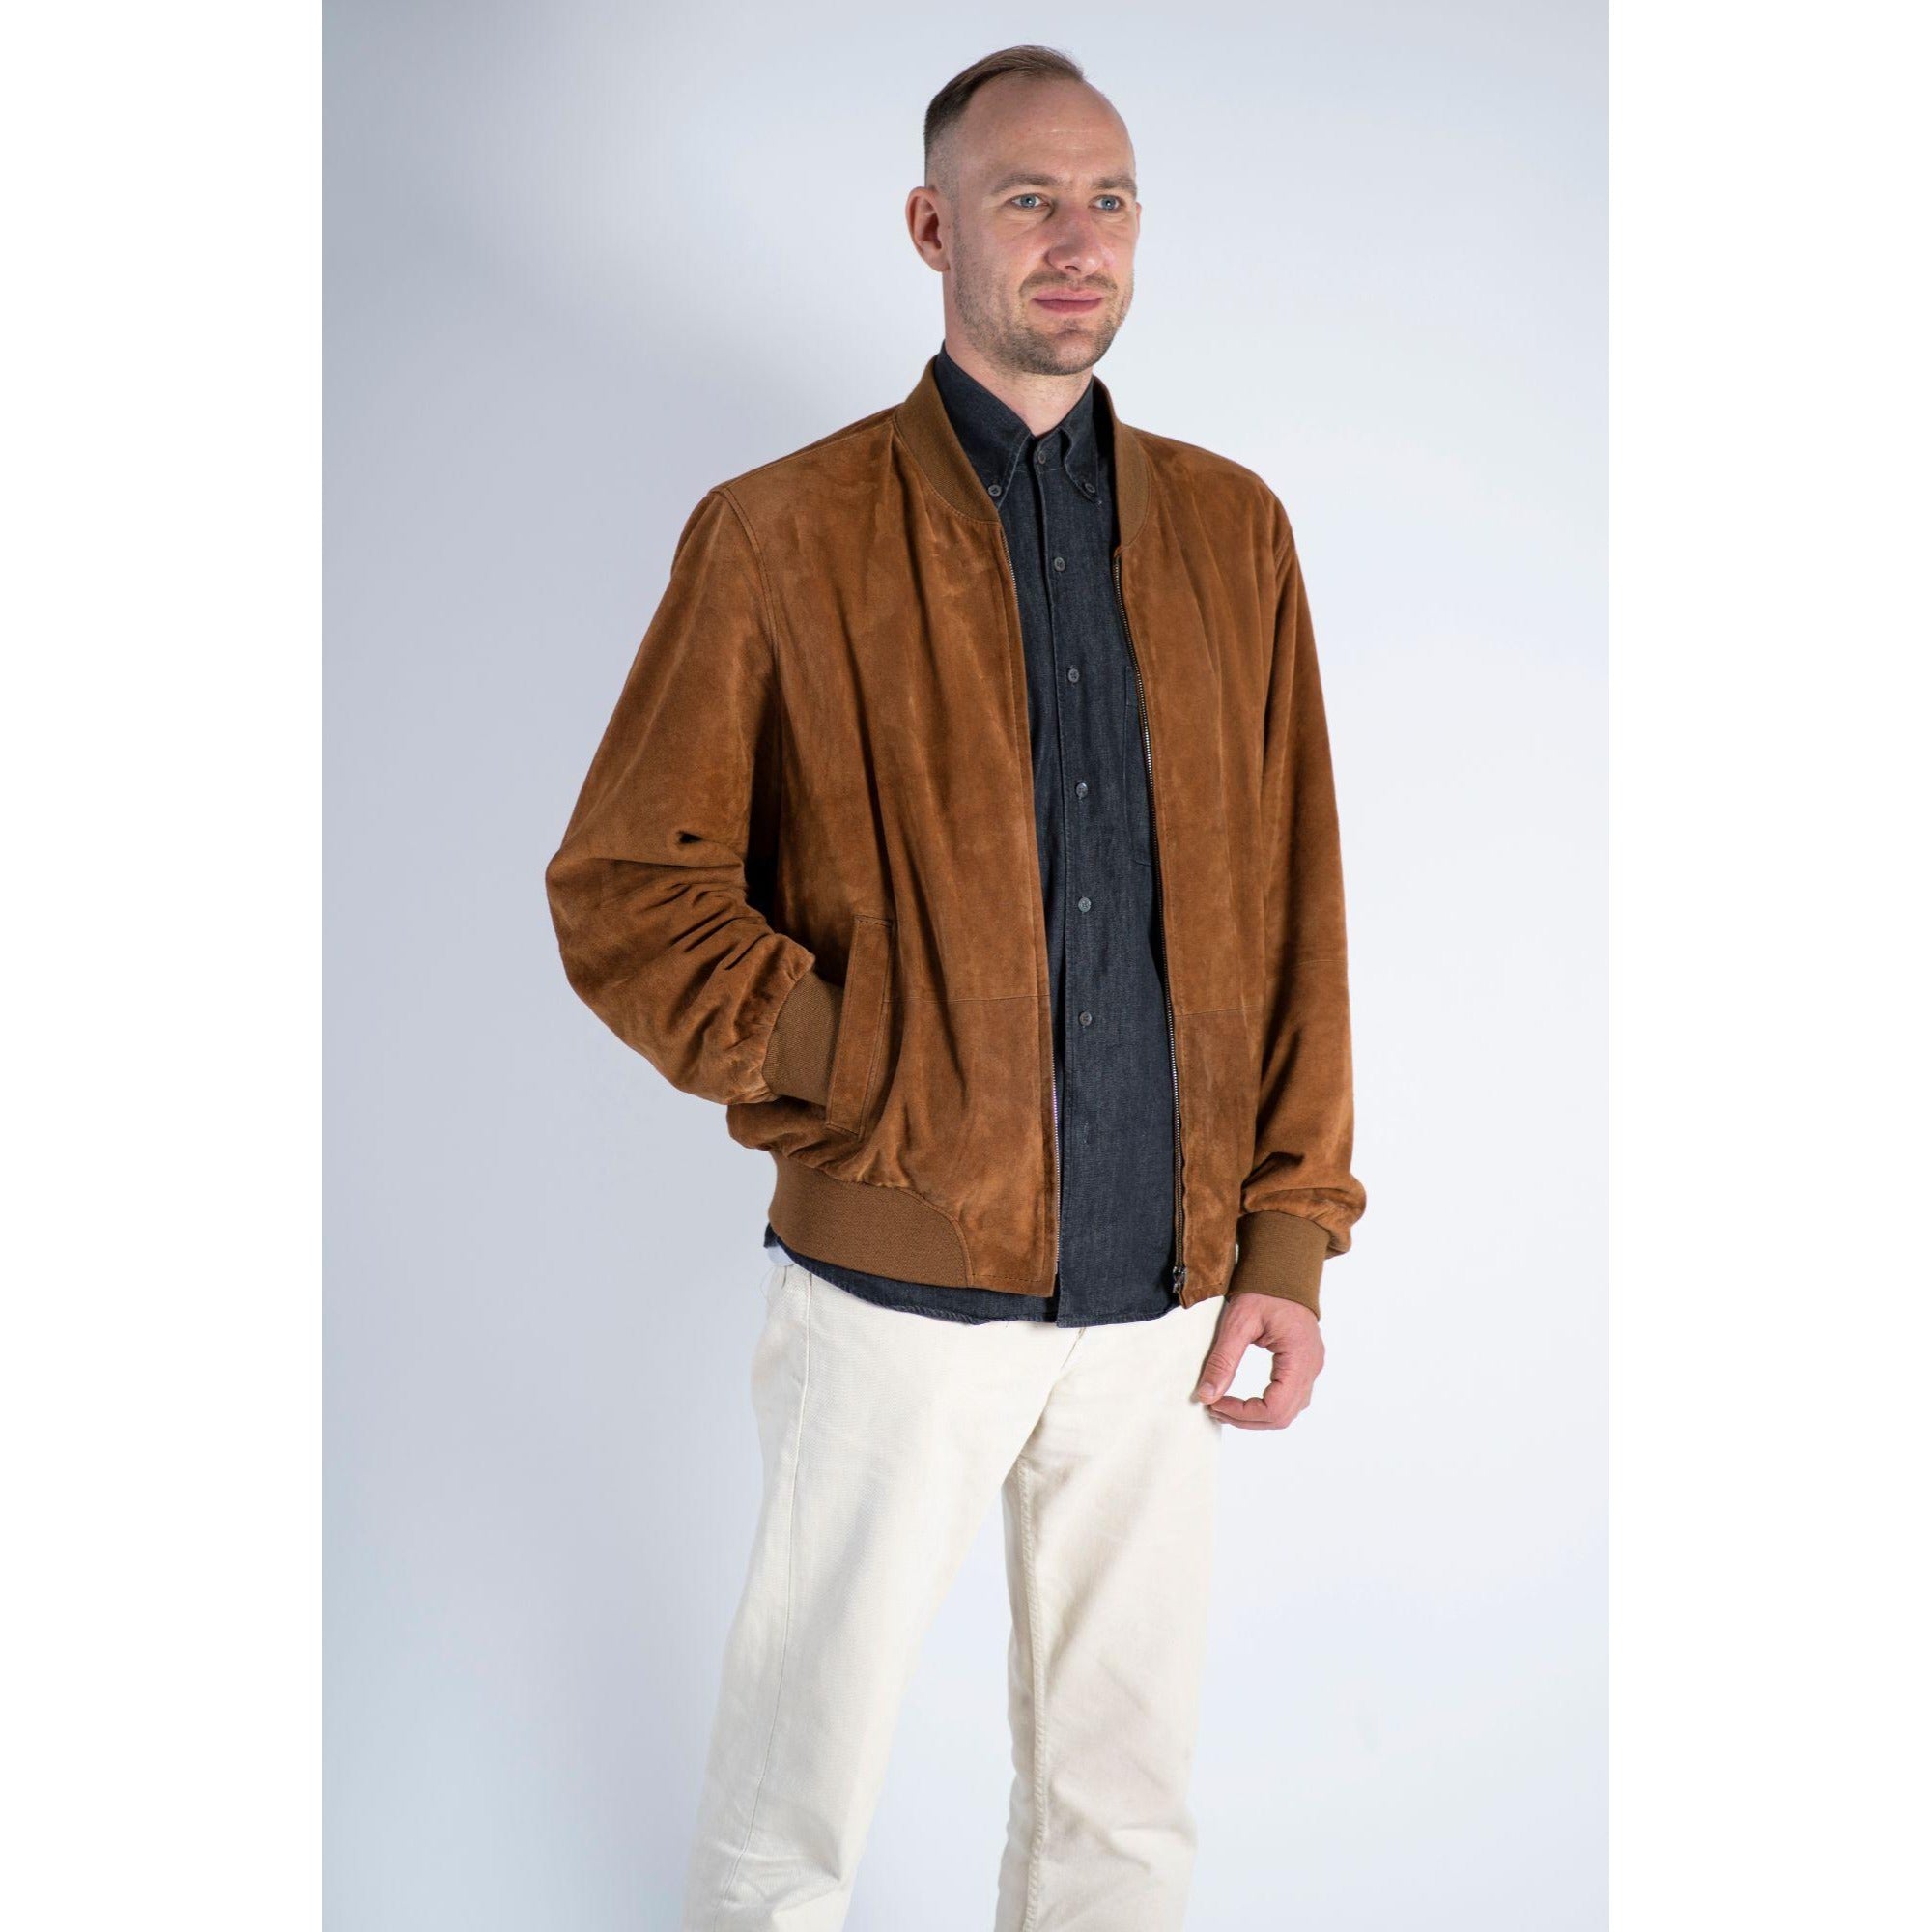 Christ Men’s Soft Brown Suede Leather Bomber Jacket SIZE XL